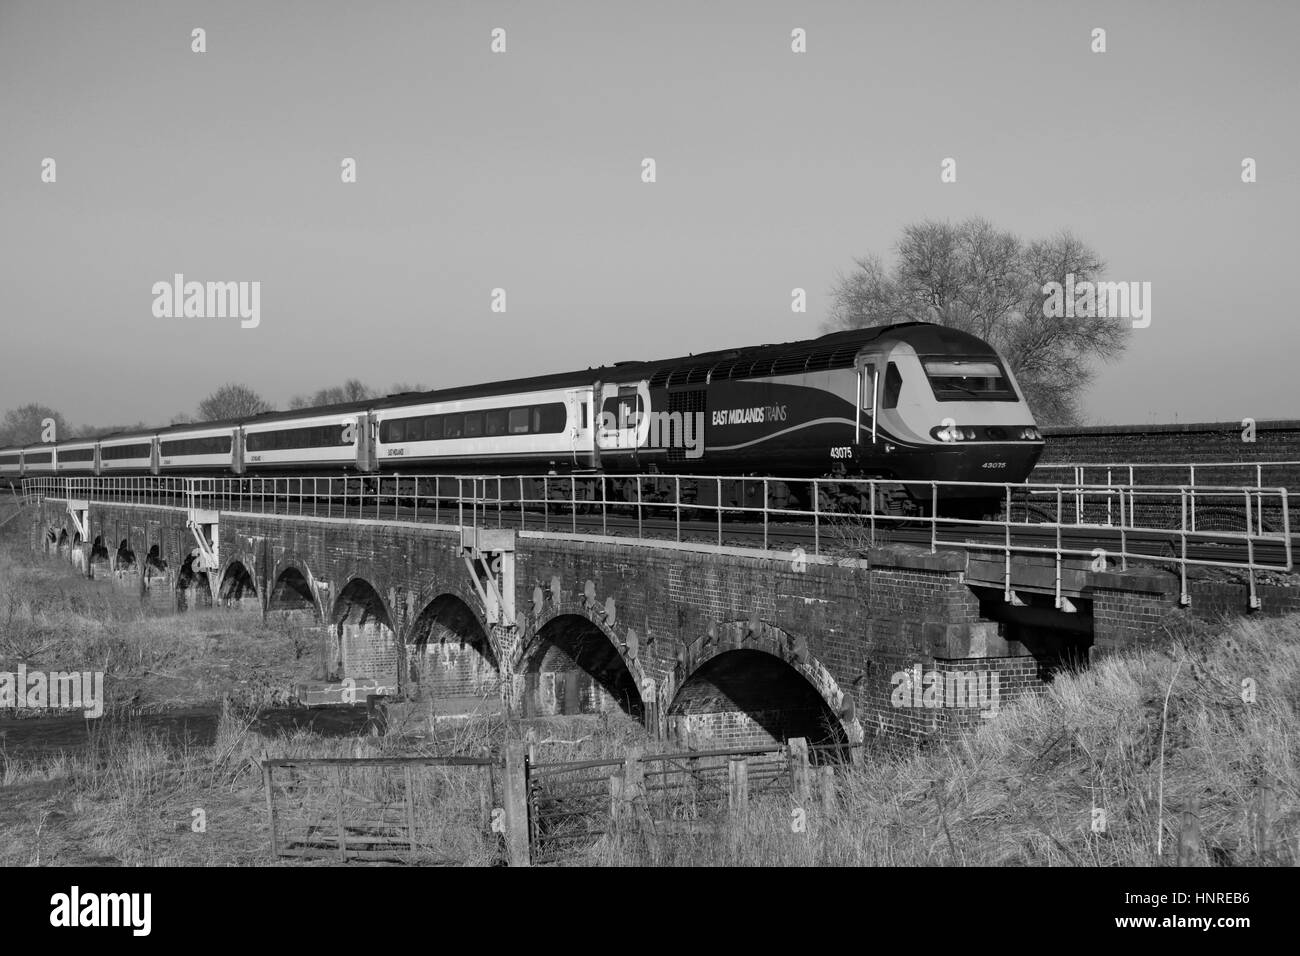 43075 East Midlands Trains, River Great Ouse, Radwell village, Bedfordshire, England Stock Photo